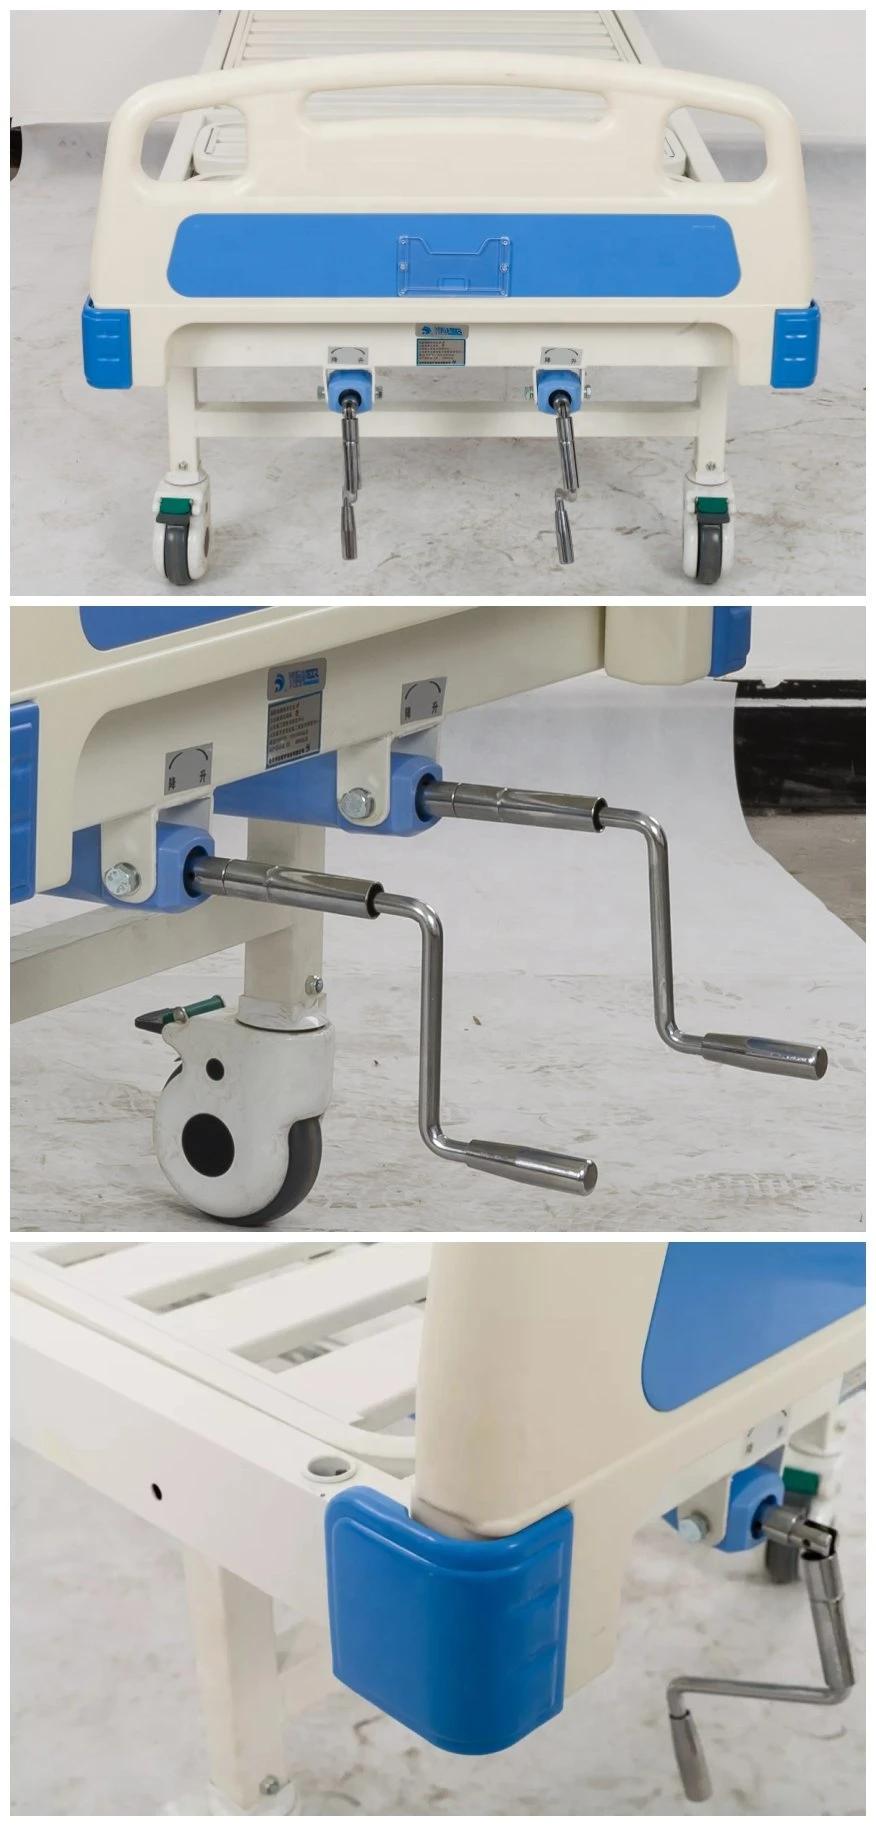 German Tente Double-Sided Casters with Locking Free Two-Stage Central Control Locking Device ABS Folding Hand Crank Manual Hospital Bed for ICU Patient ICU Bed